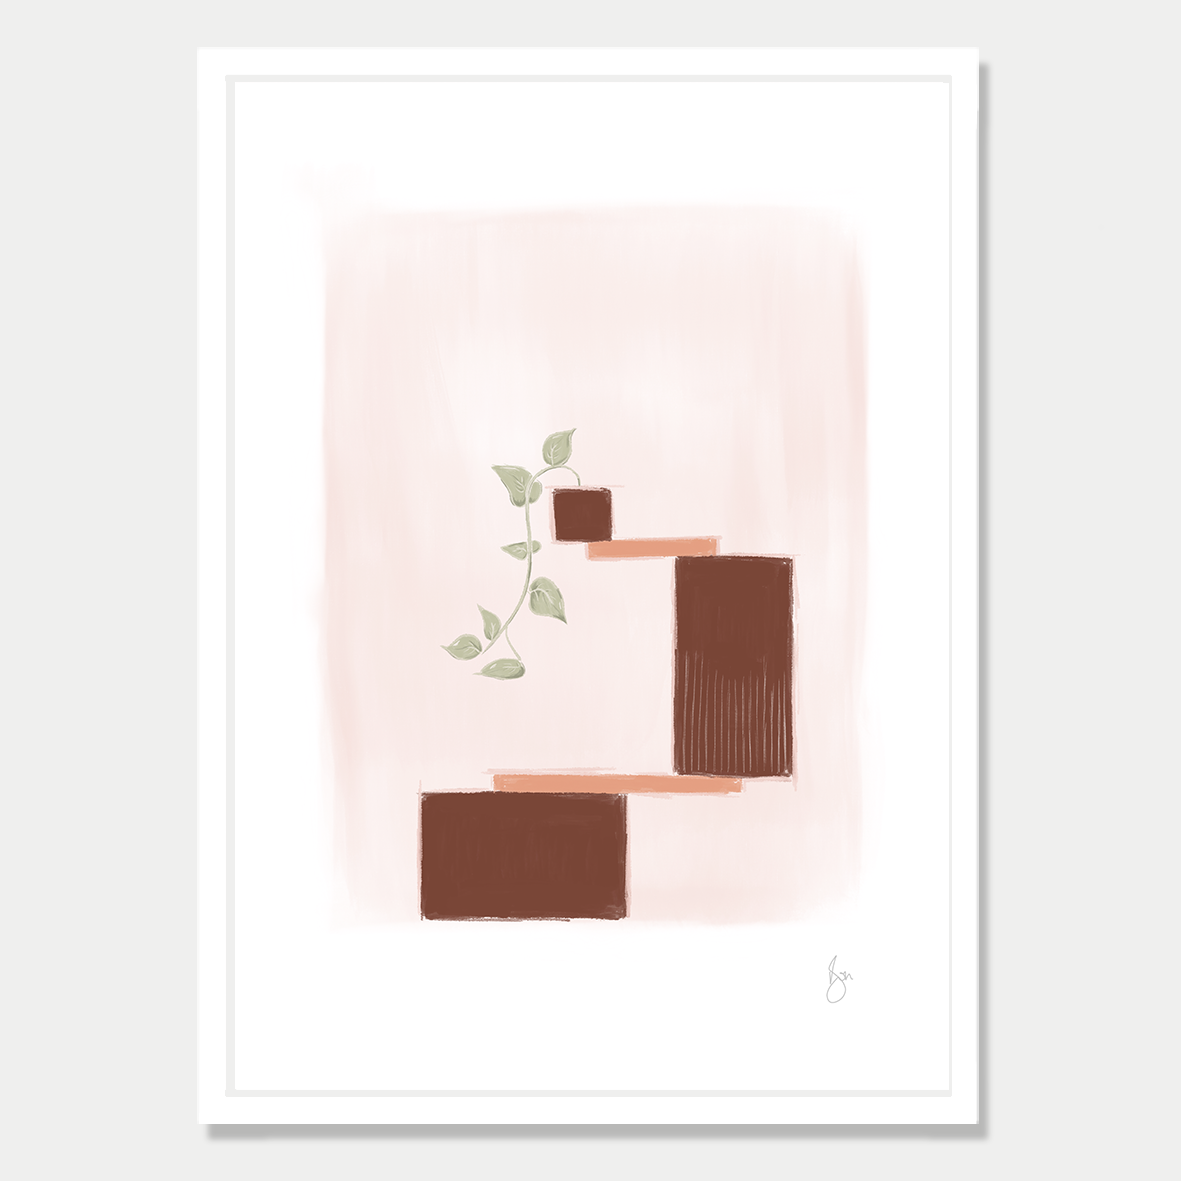 Art print of several blocks balancing with a single vine growing from the top block, in a soft autumn colour palette by Bon Jung. Printed in New Zealand by endemicworld and framed in white.